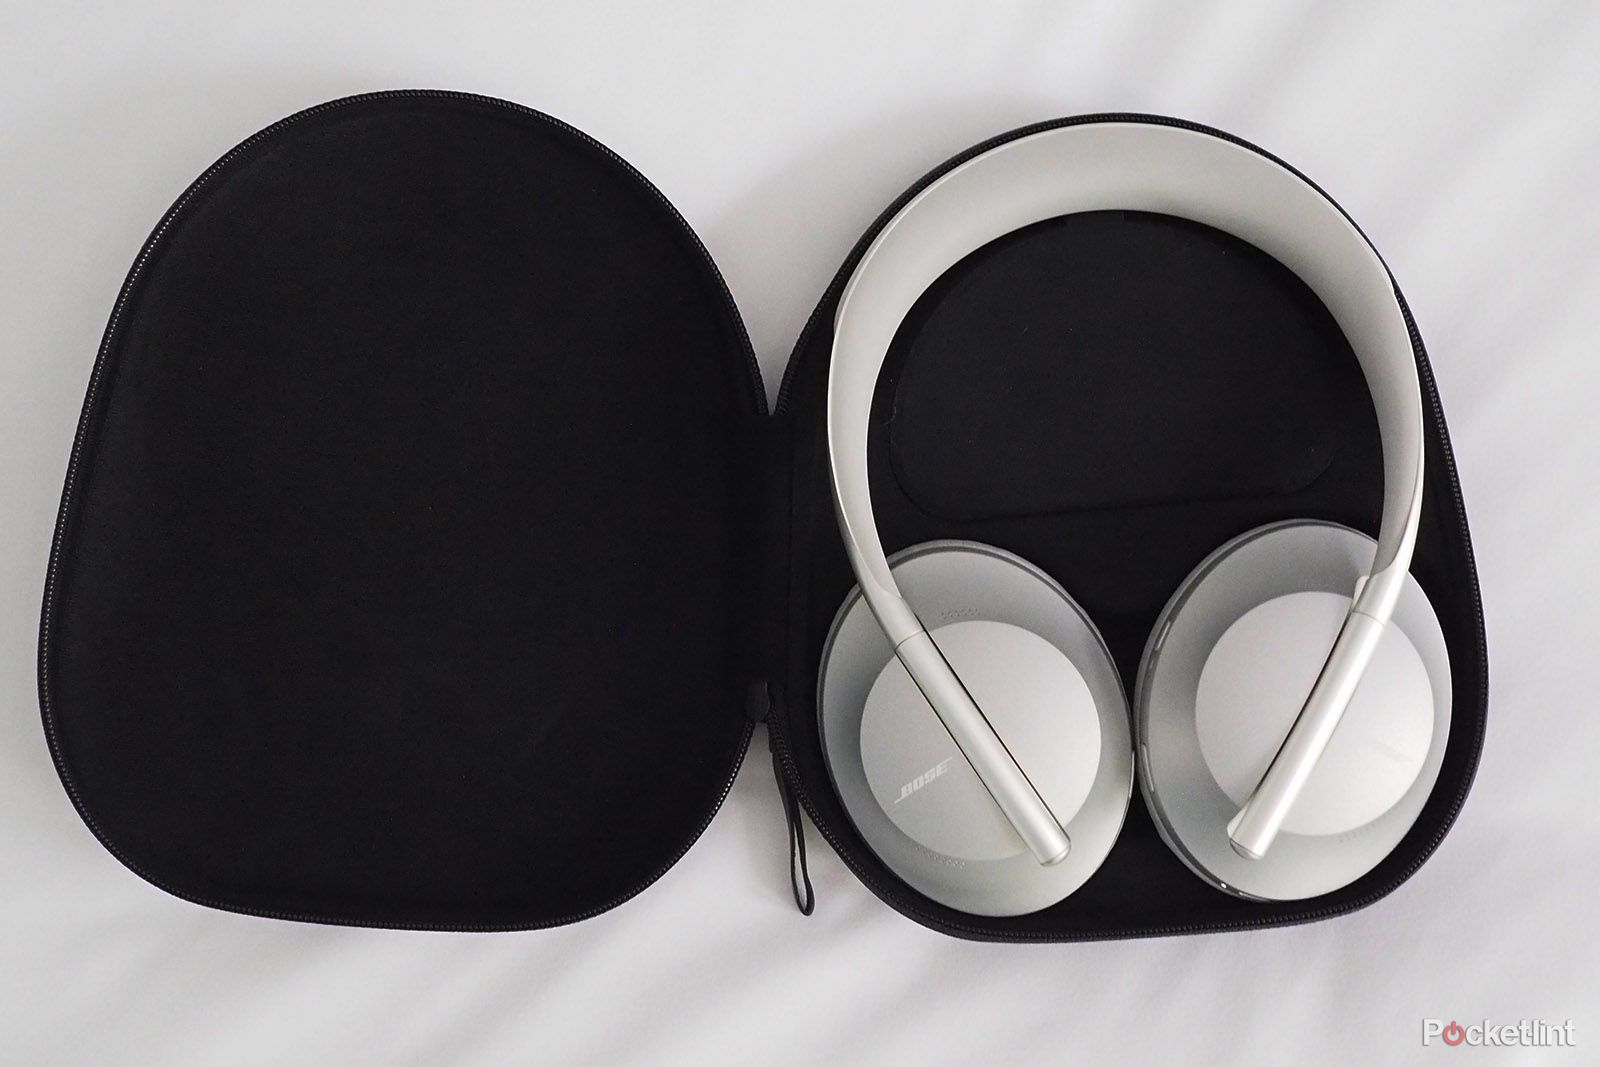 Bose Smart Noise Cancelling Headphones 700 review image 2